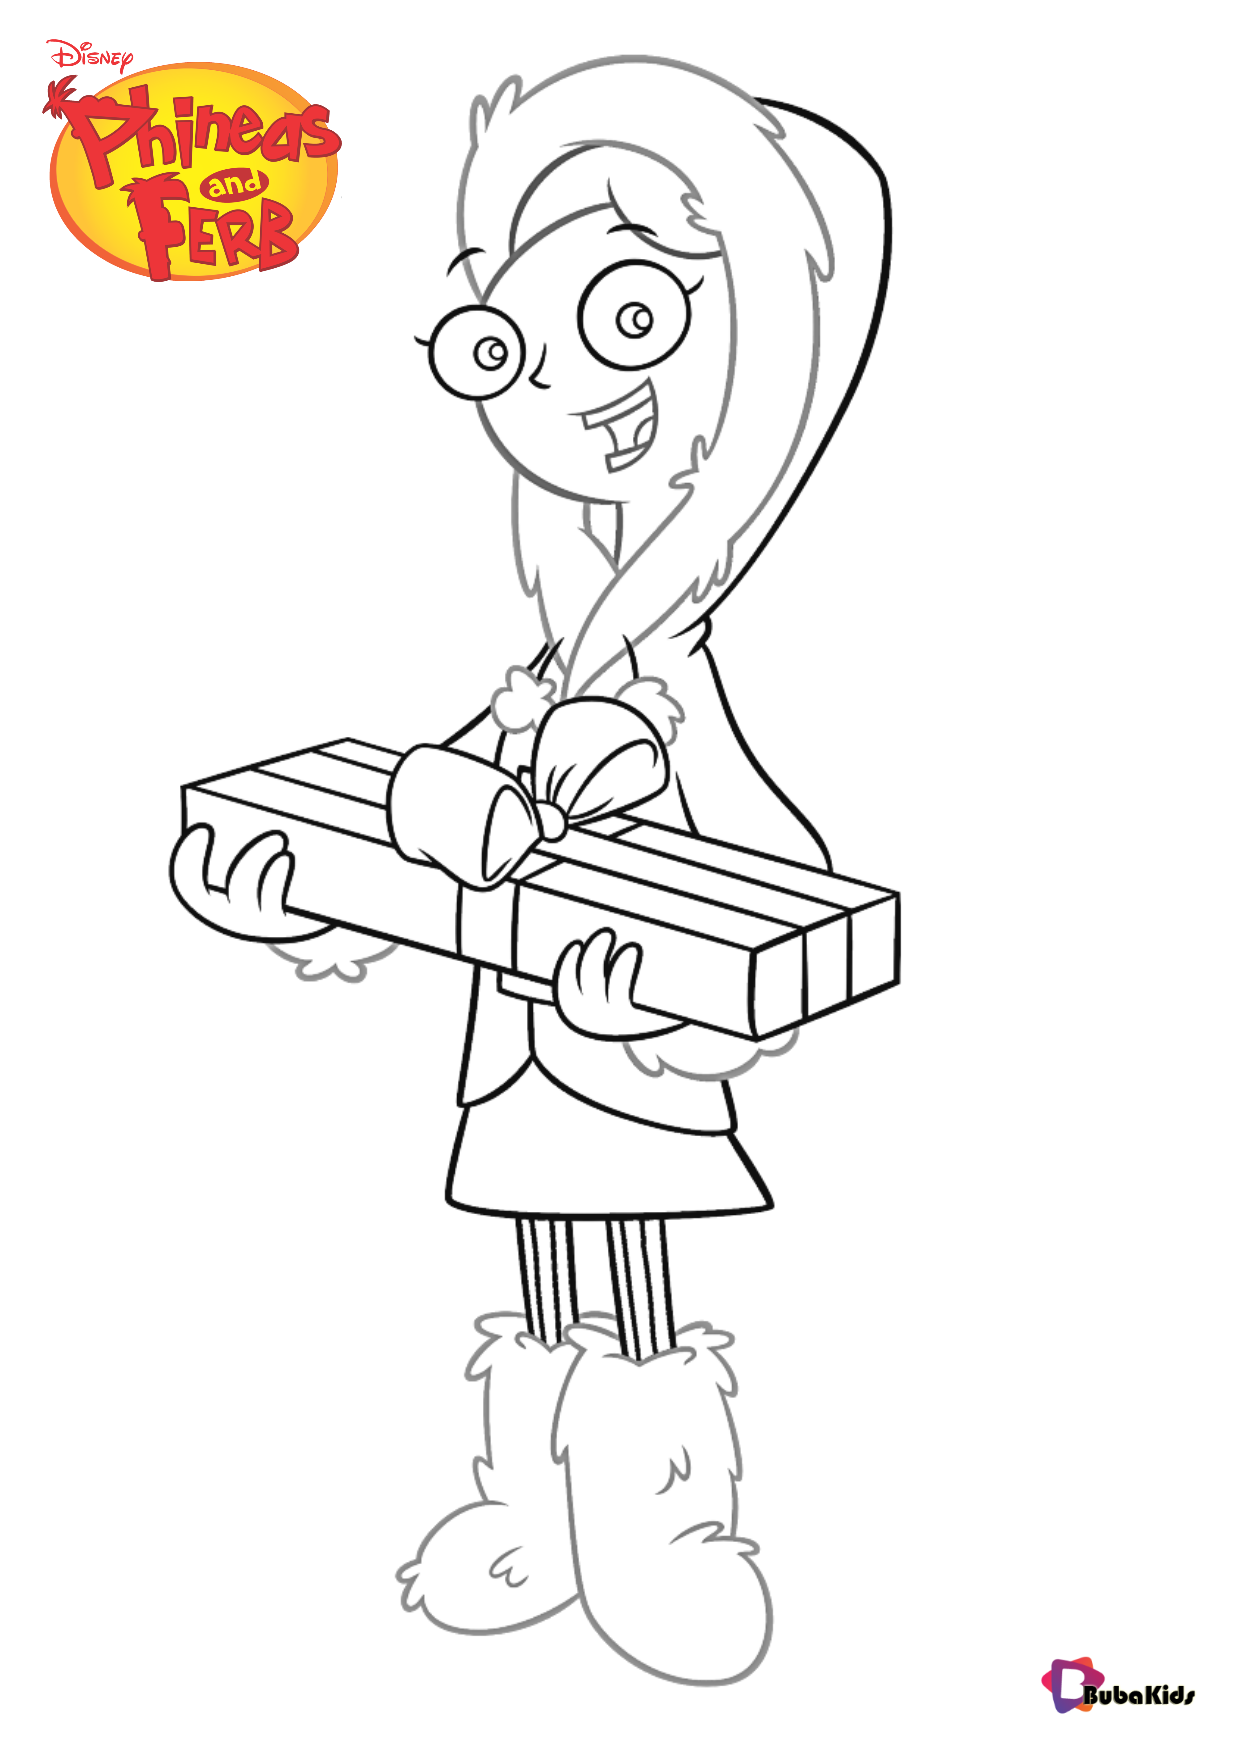 Phineas and Ferb coloring sheet Candace Flynn coloring pages Wallpaper